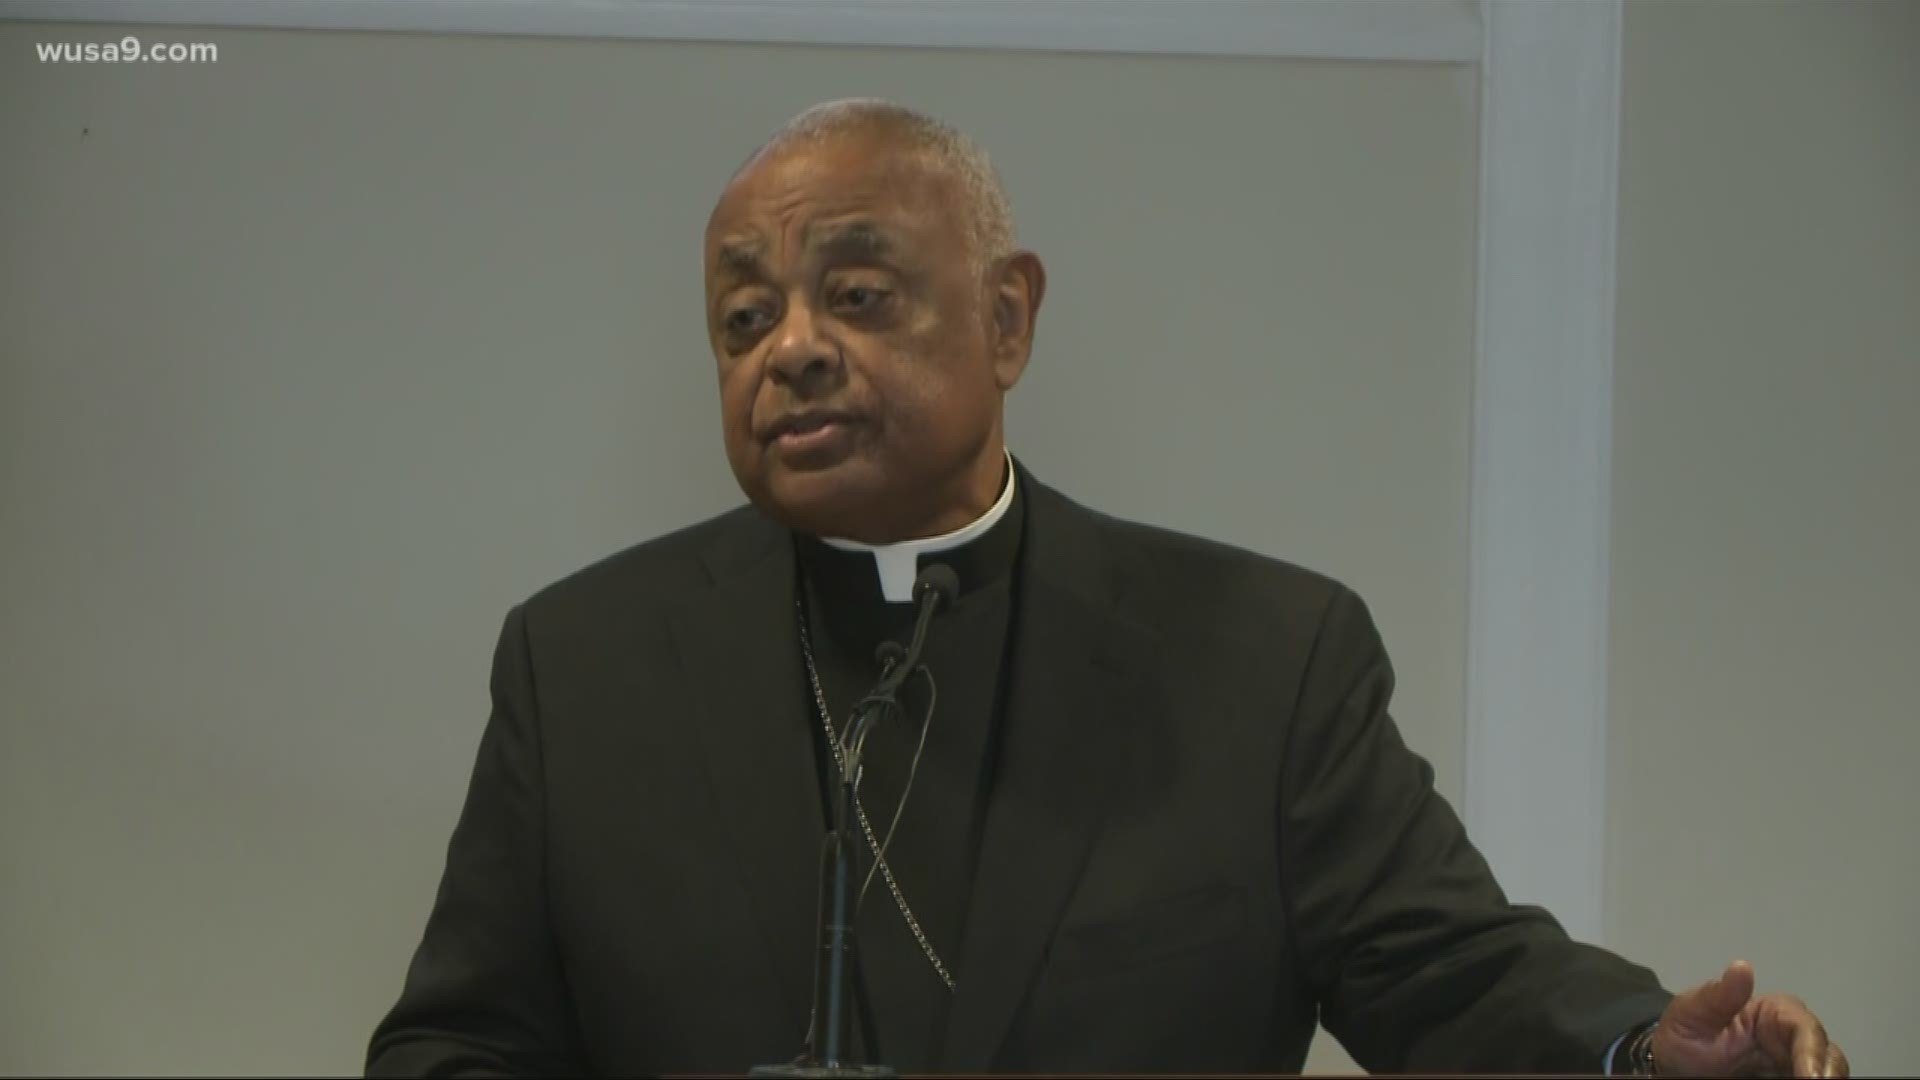 A major announcement out of the Vatican: the Archdiocese of Washington now has a new leader. His name is Wilton Gregory -- a longtime archbishop out of Atlanta.